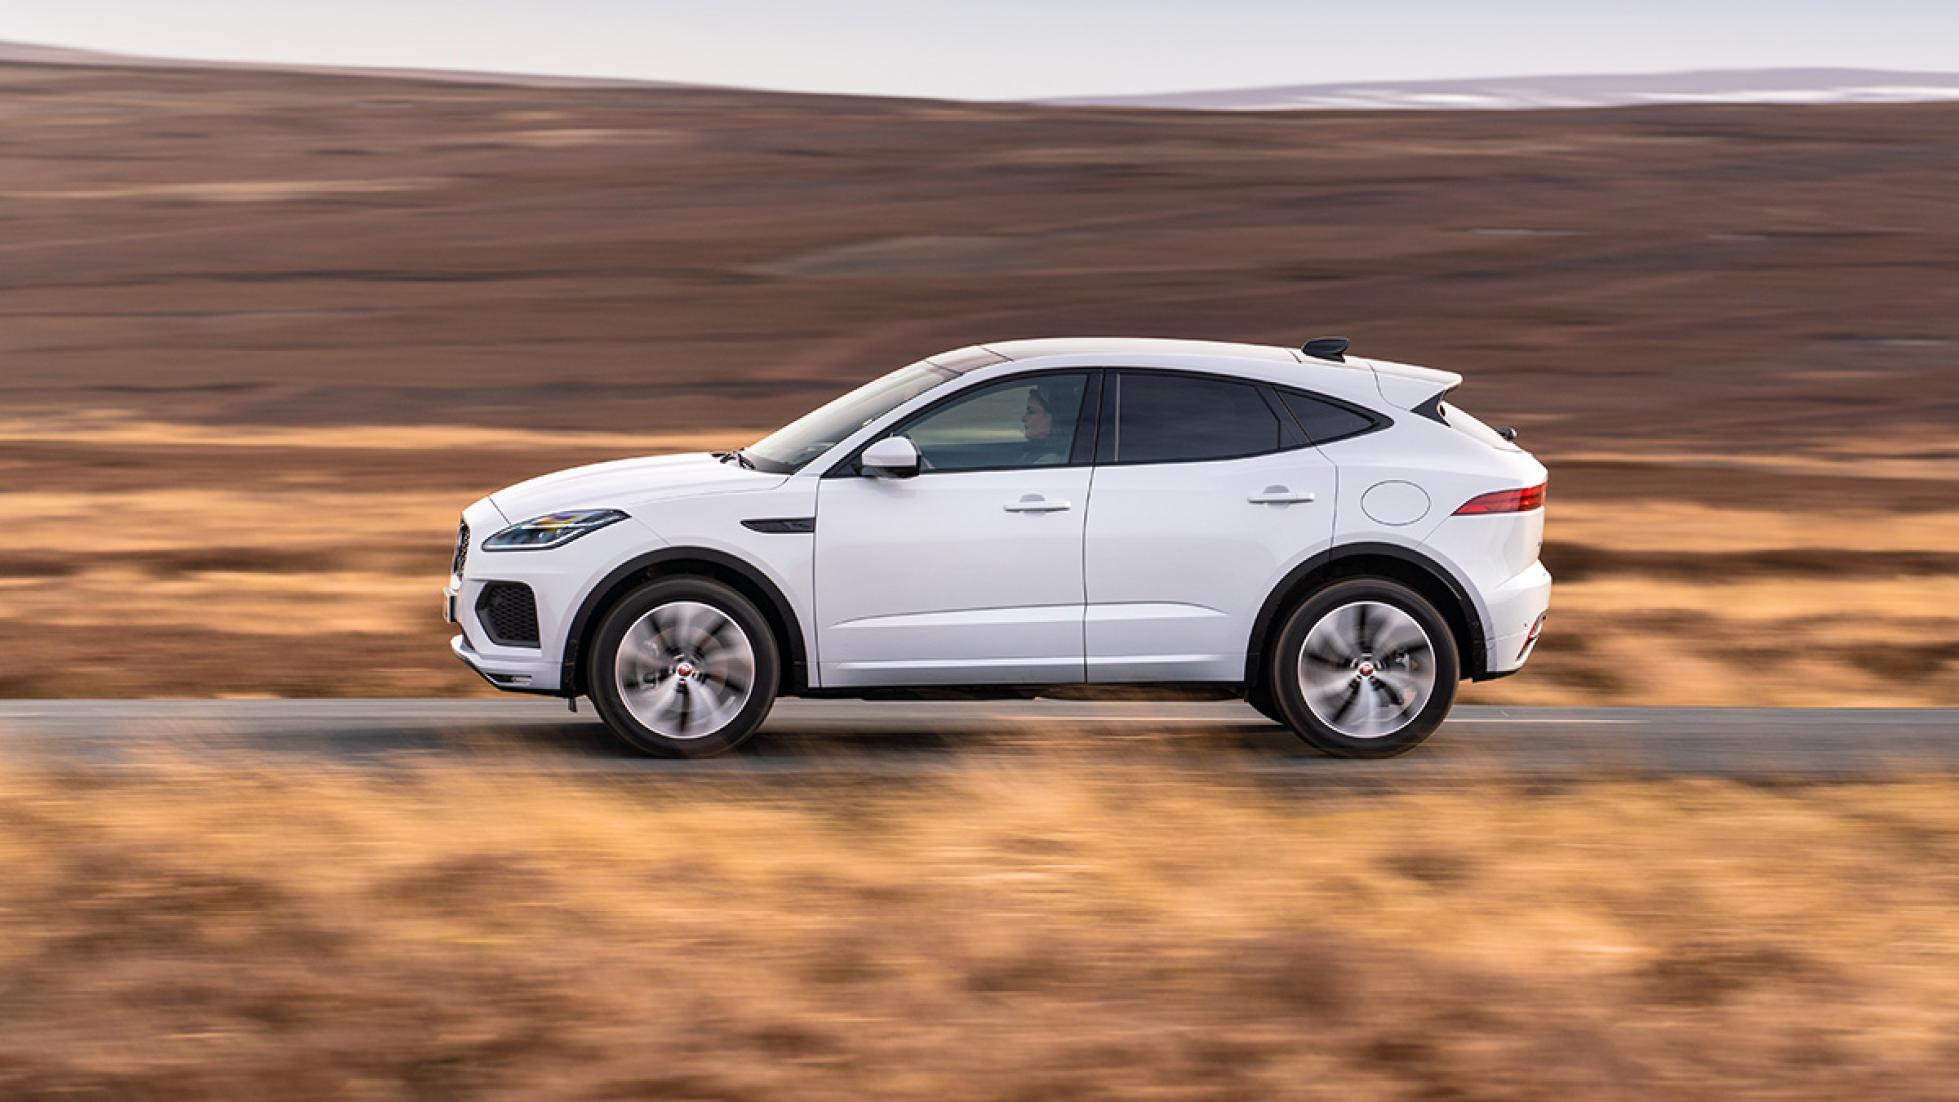 TopGear Jaguar EPace review baby crossover tested